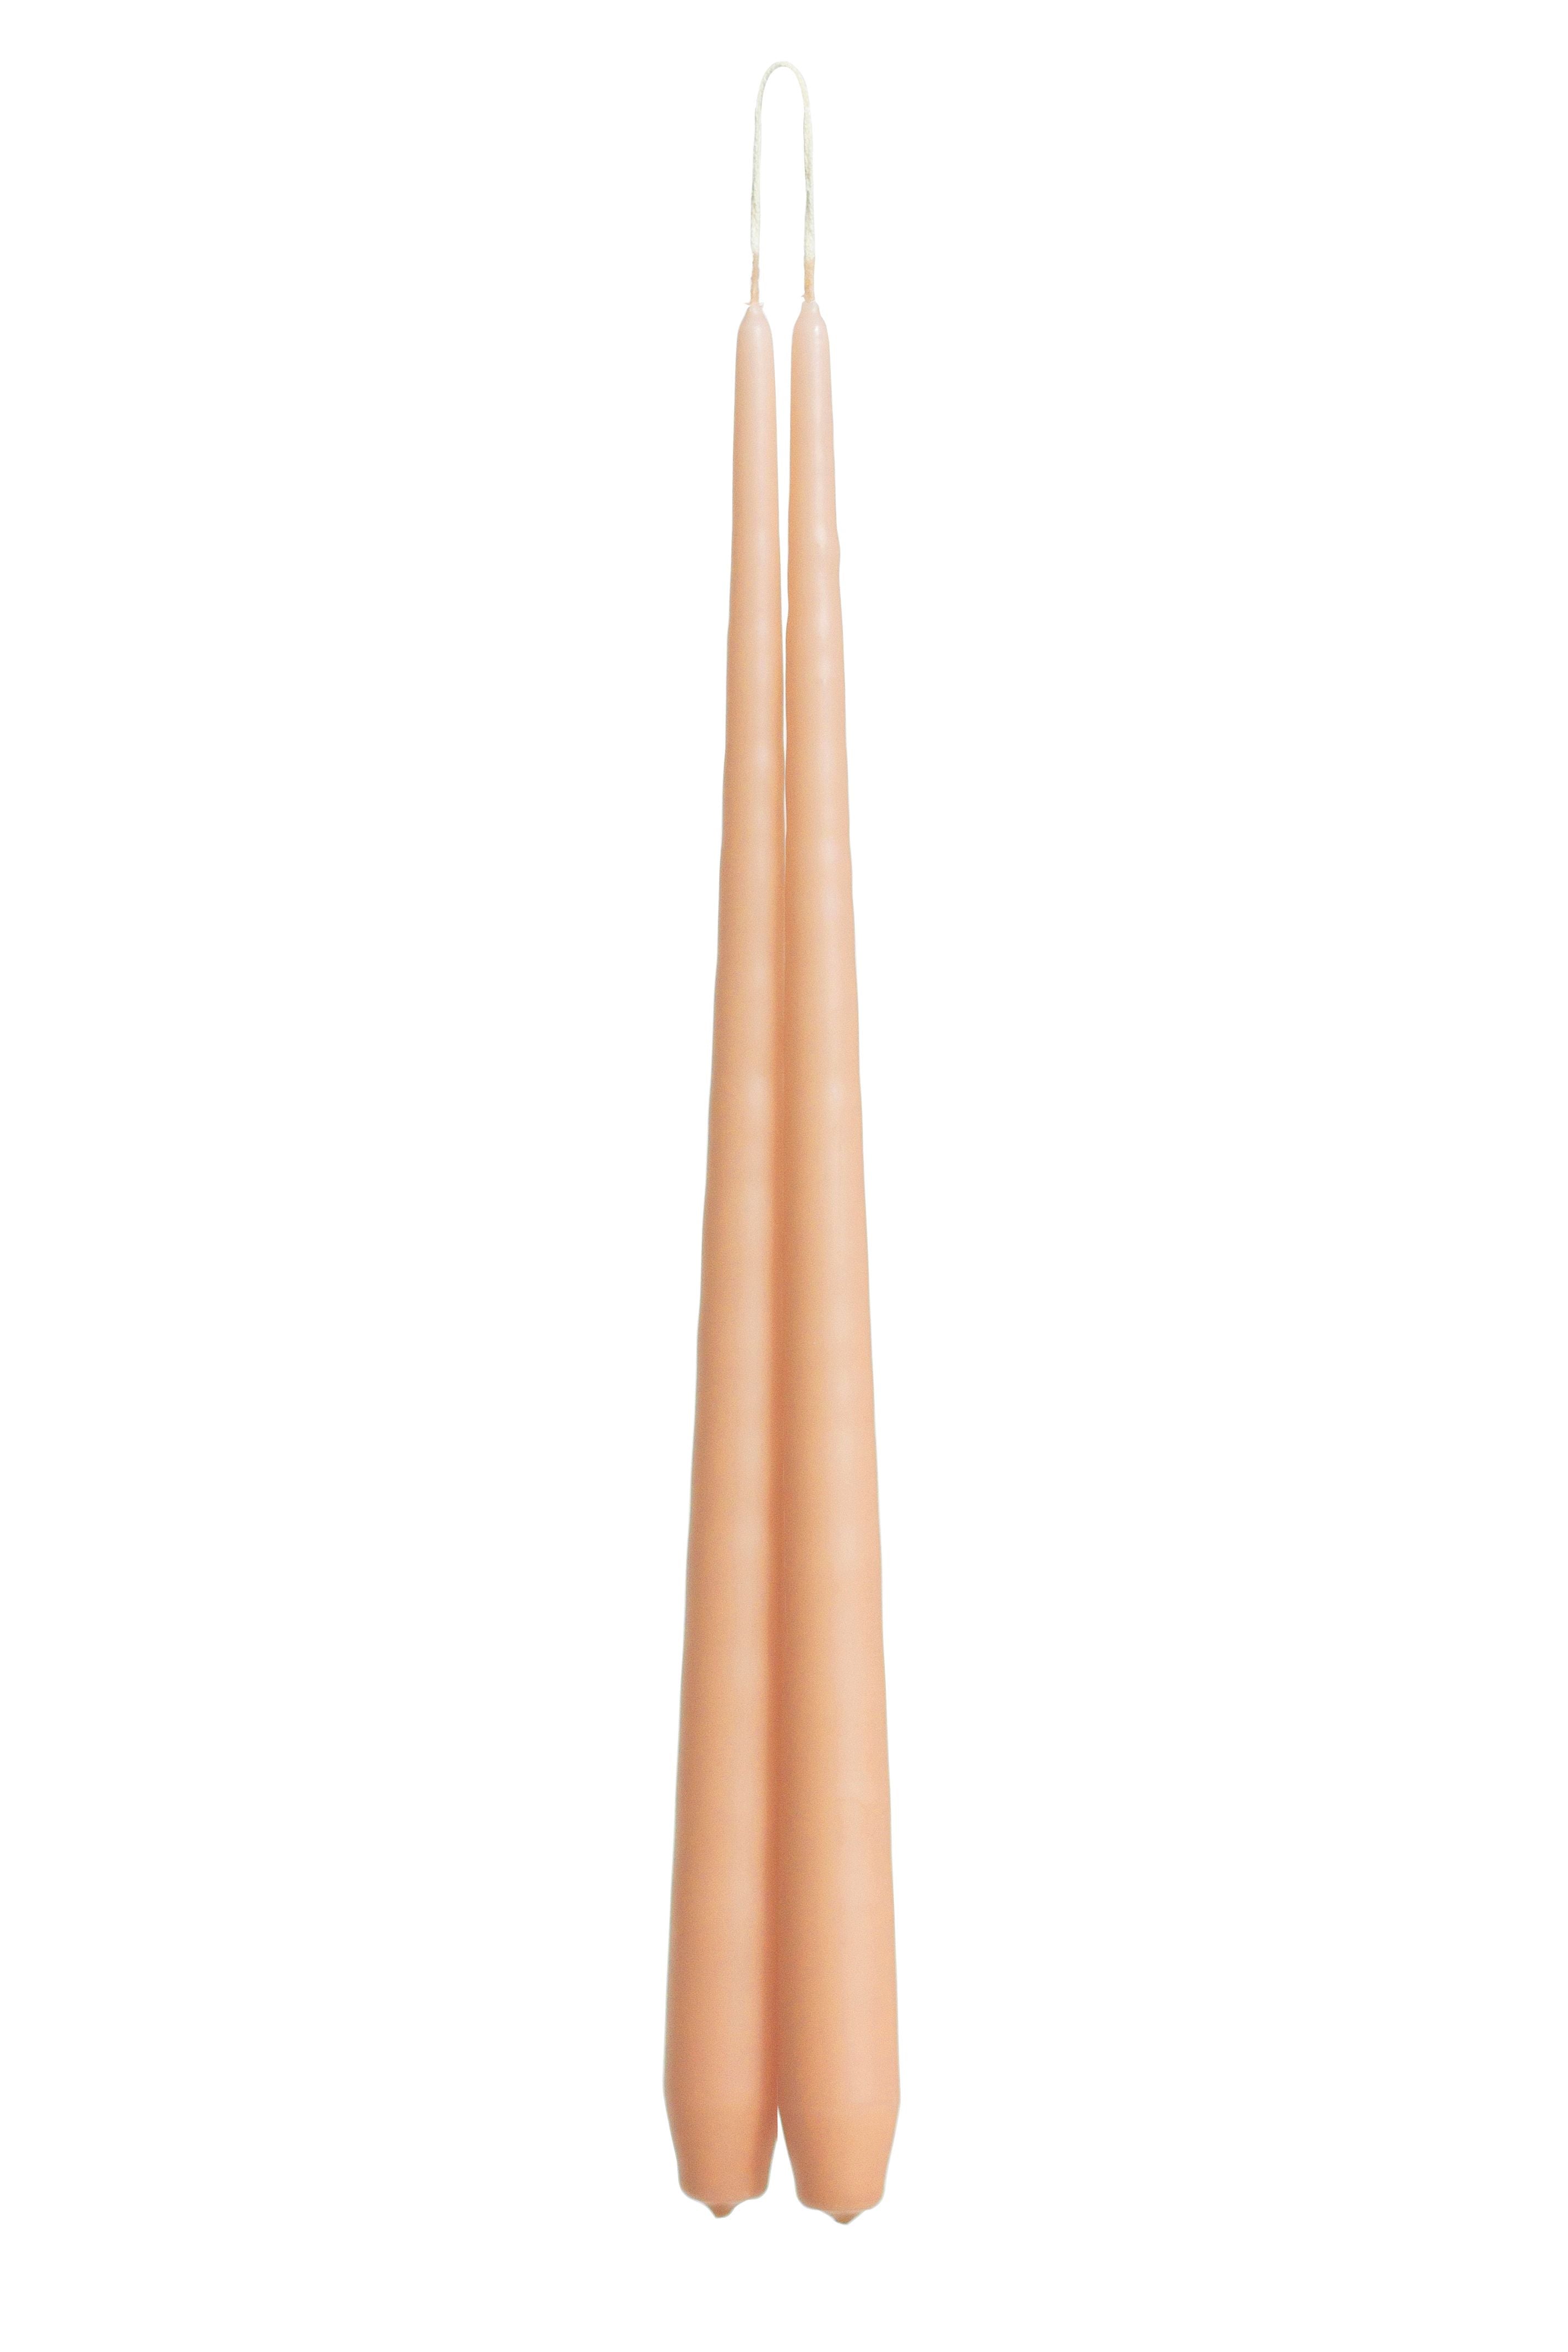 Peach Tapered Candle - pair